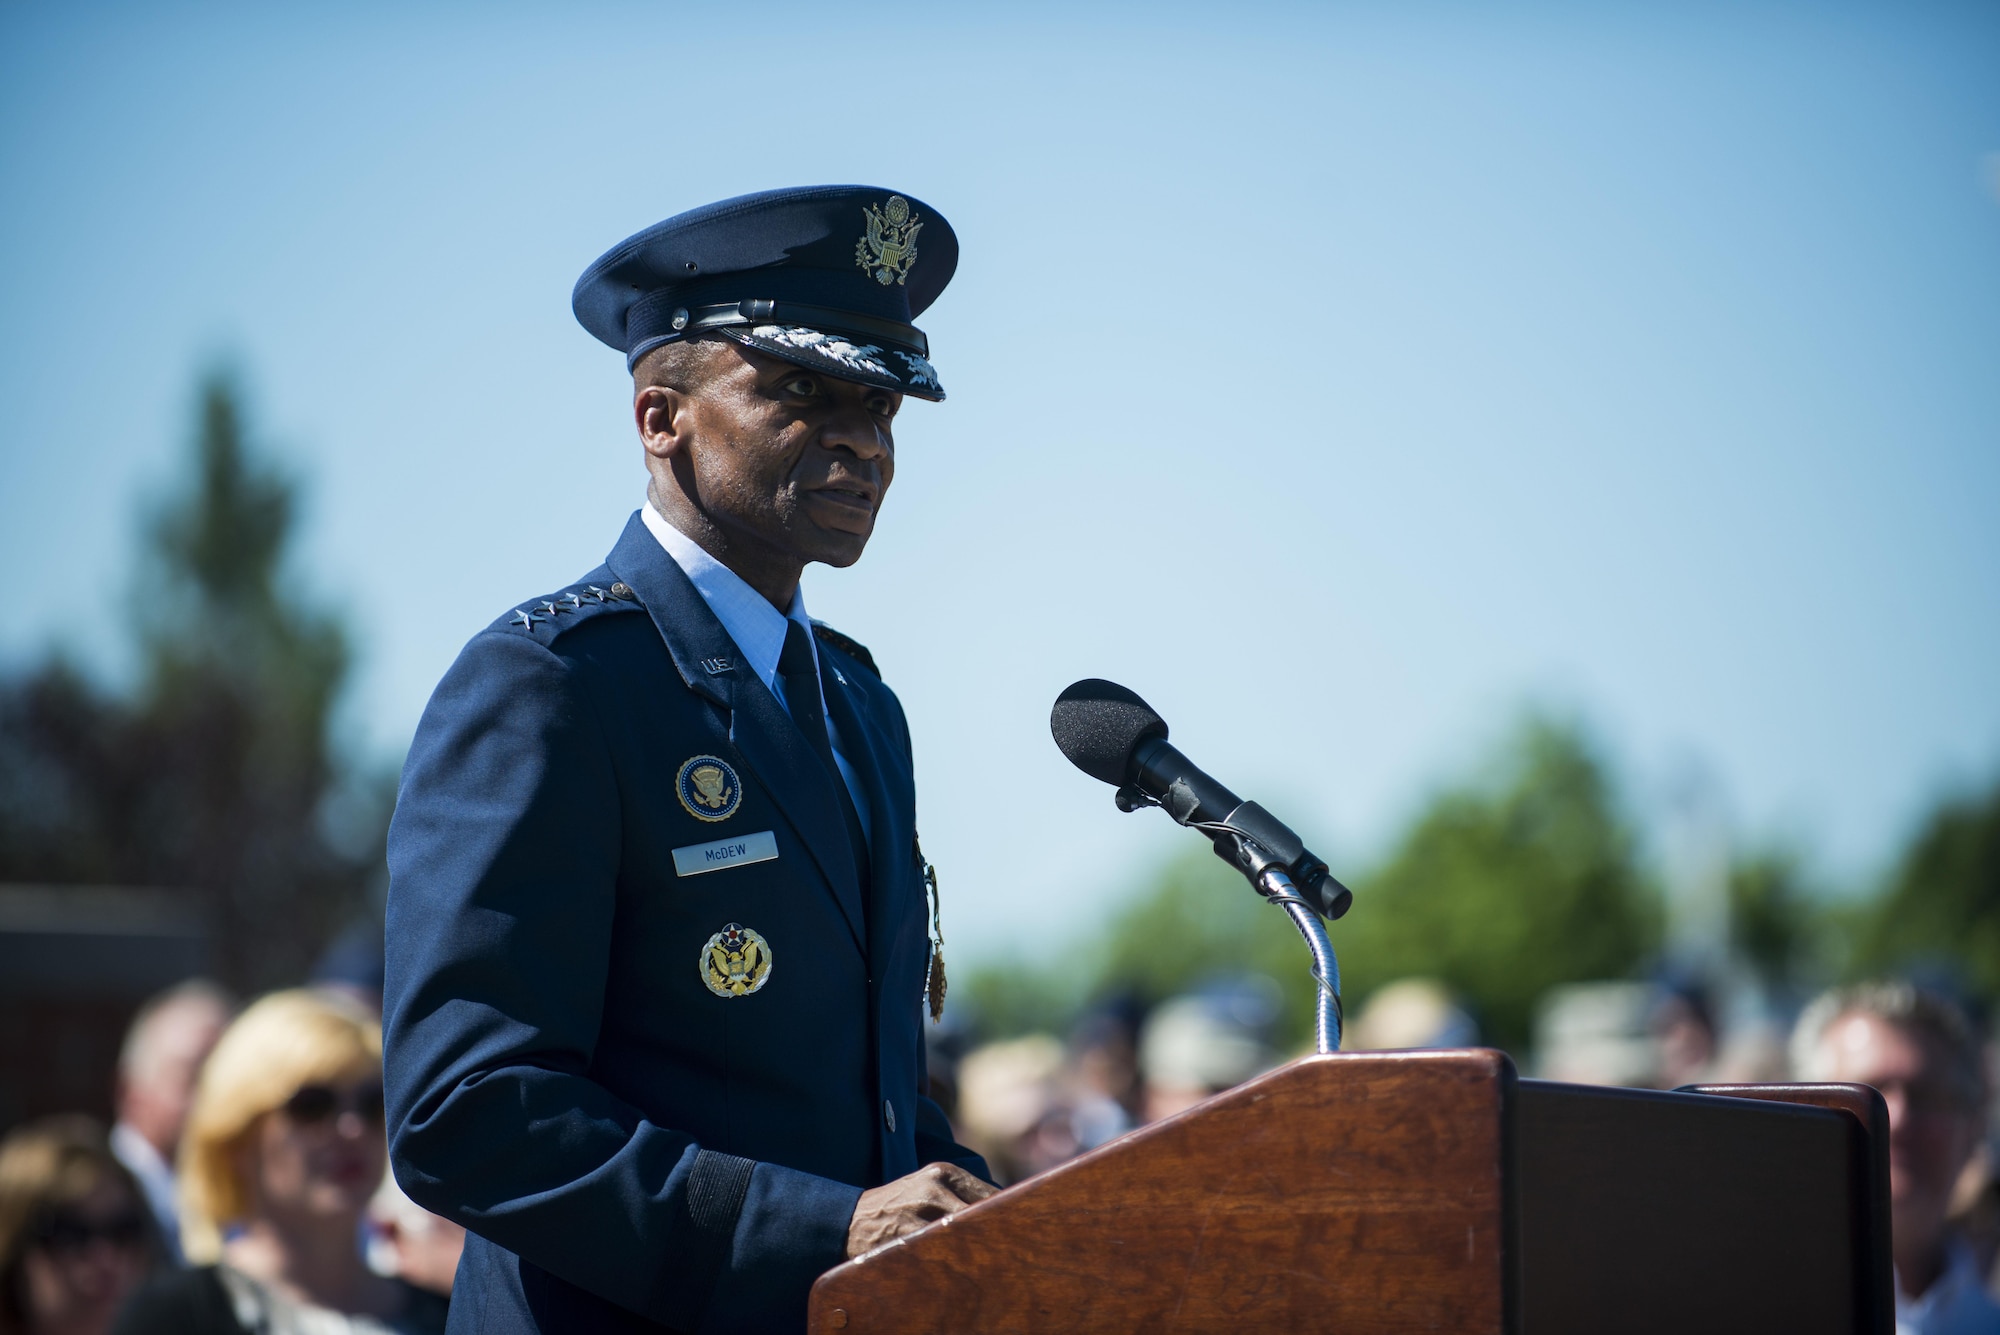 Gen. Darren W. McDew speaks during the Air Mobility Command change of command ceremony at Scott Air Force Base, Ill., Aug. 11, 2015. Gen. Carlton D. Everhart II assumed command of AMC from McDew, who will remain at Scott AFB as the new commander of U.S. Transportation Command. Chief of Staff of the Air Force Gen. Mark A. Welsh III officiated at the ceremony. (U.S. Air Force photo/Staff Sgt. Clayton Lenhardt)   